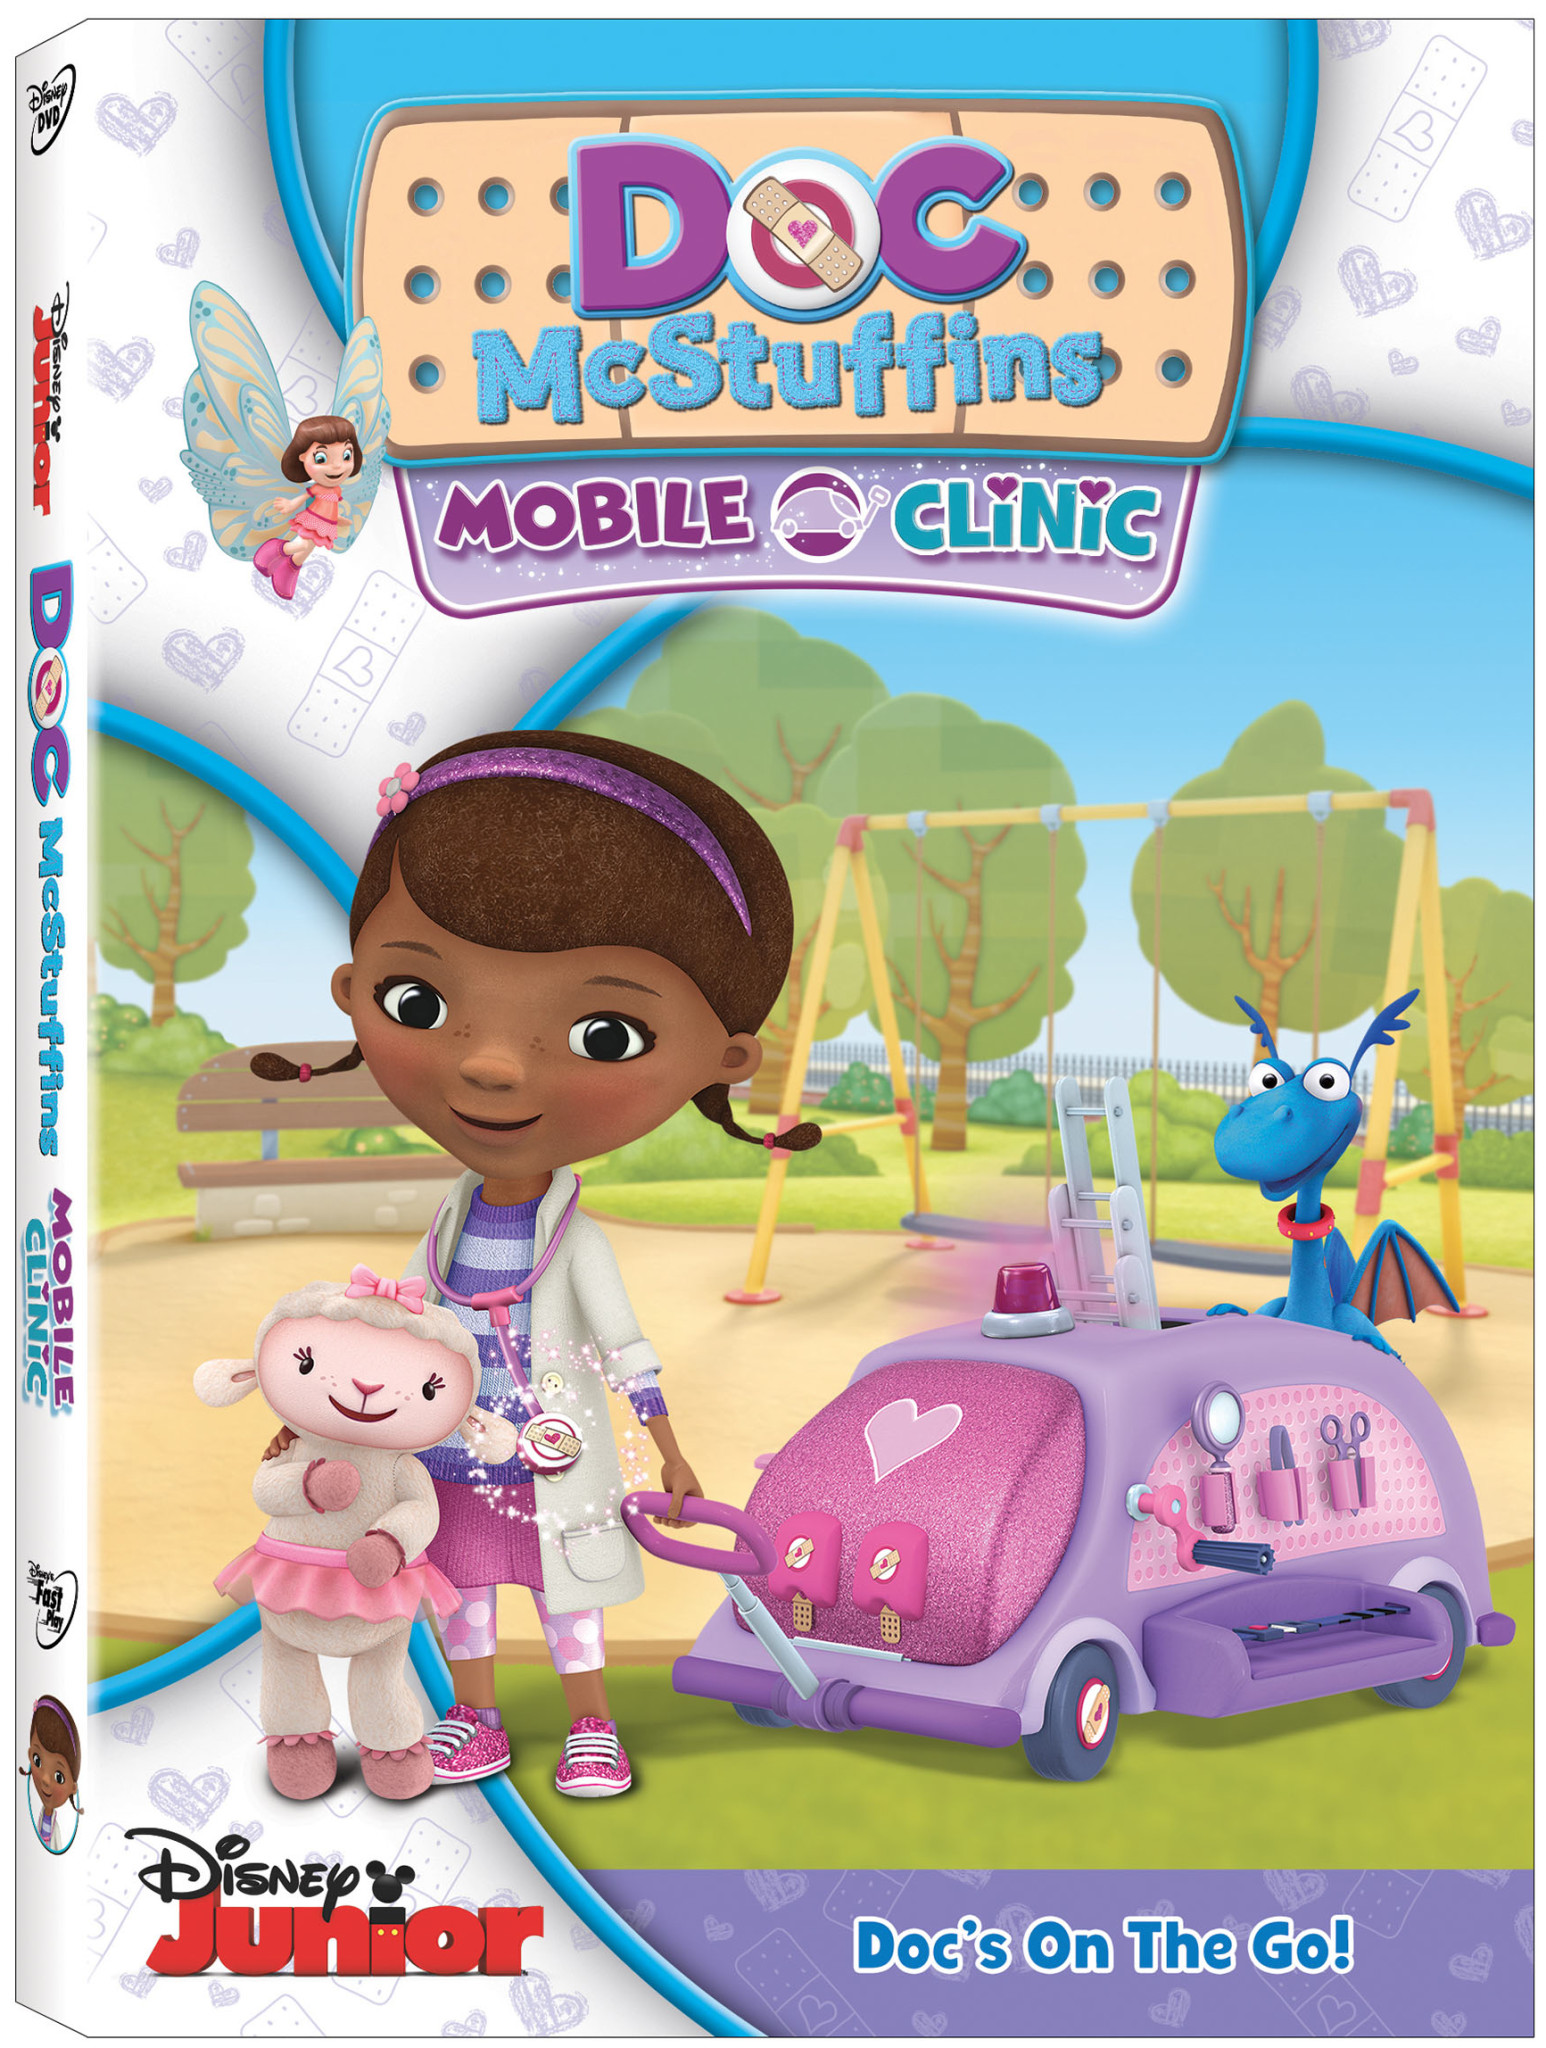 Doc McStuffins Mobile Clinic coming to DVD on 3/18